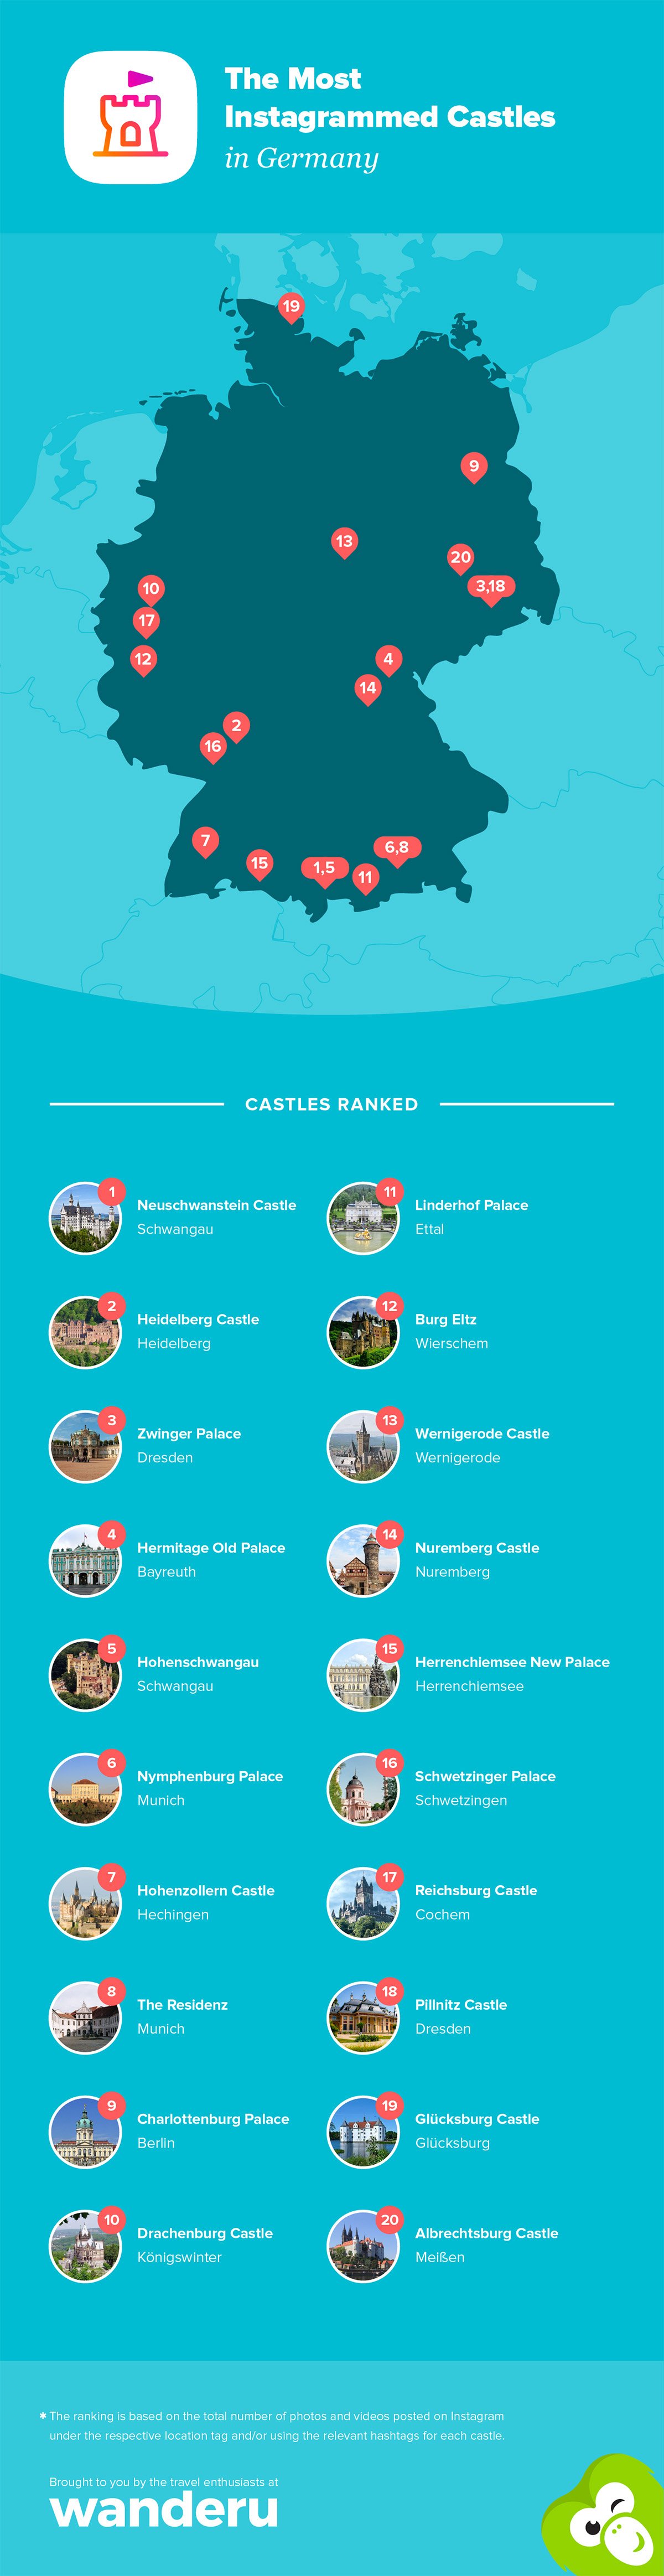 Ranking of the most instagrammed castles in Germany.